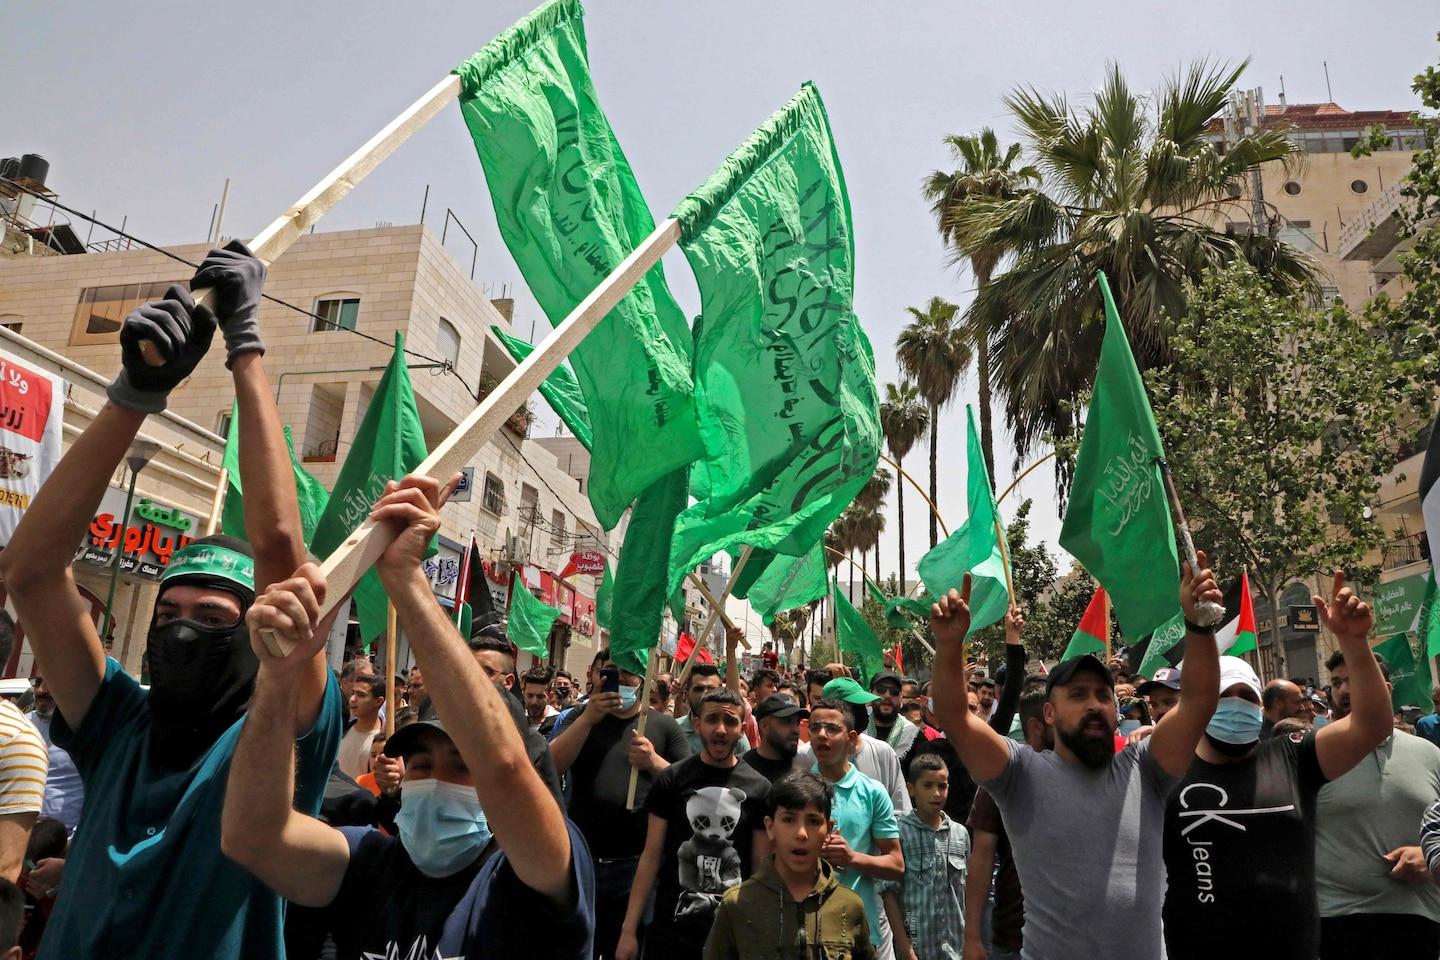 Hamas claims responsibility for West Bank shooting attack